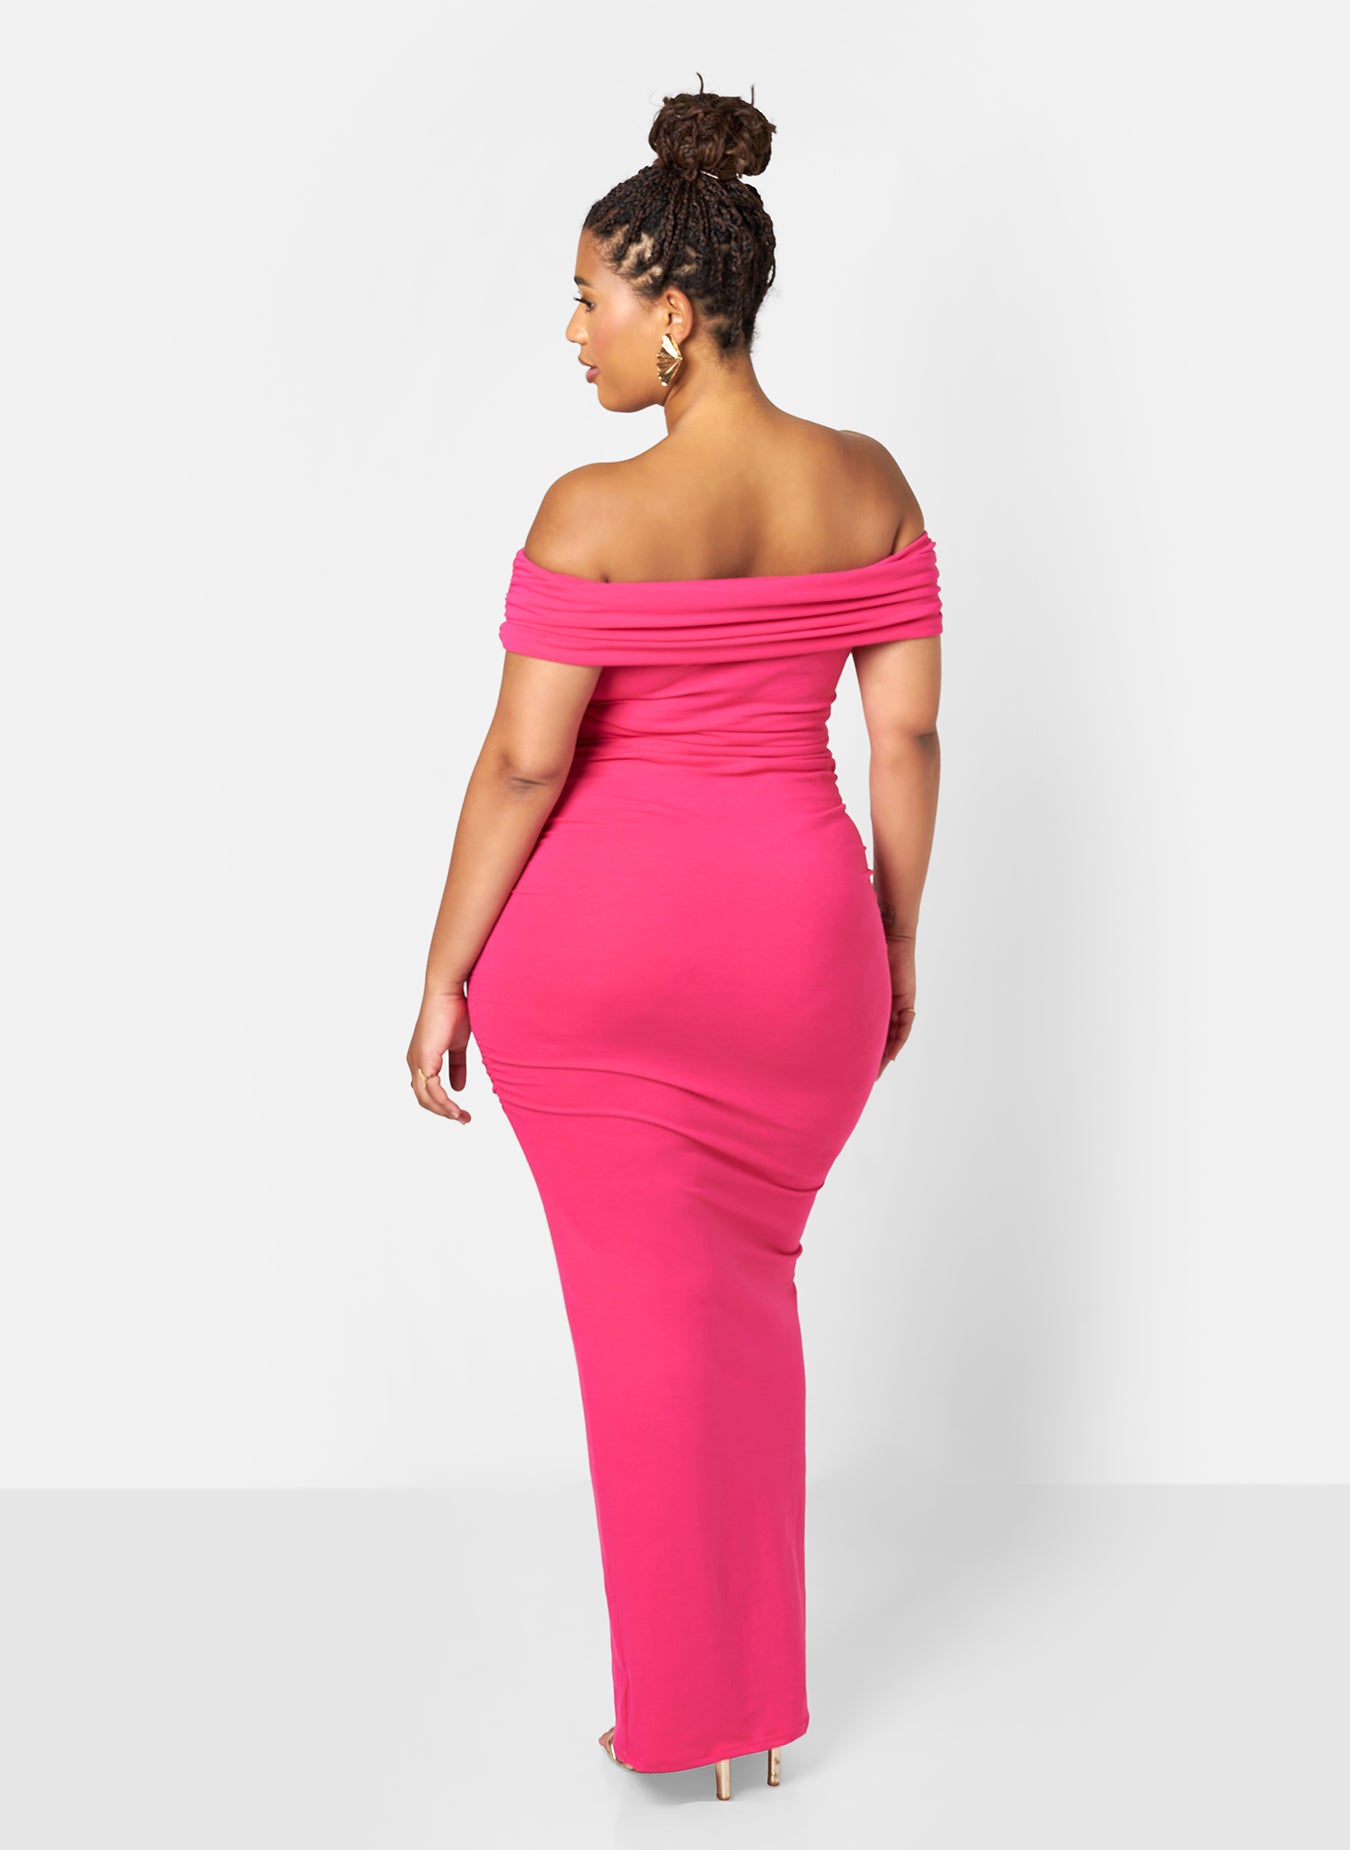 Analise Cotton Over The Shoulder BodyconMaxi Dress